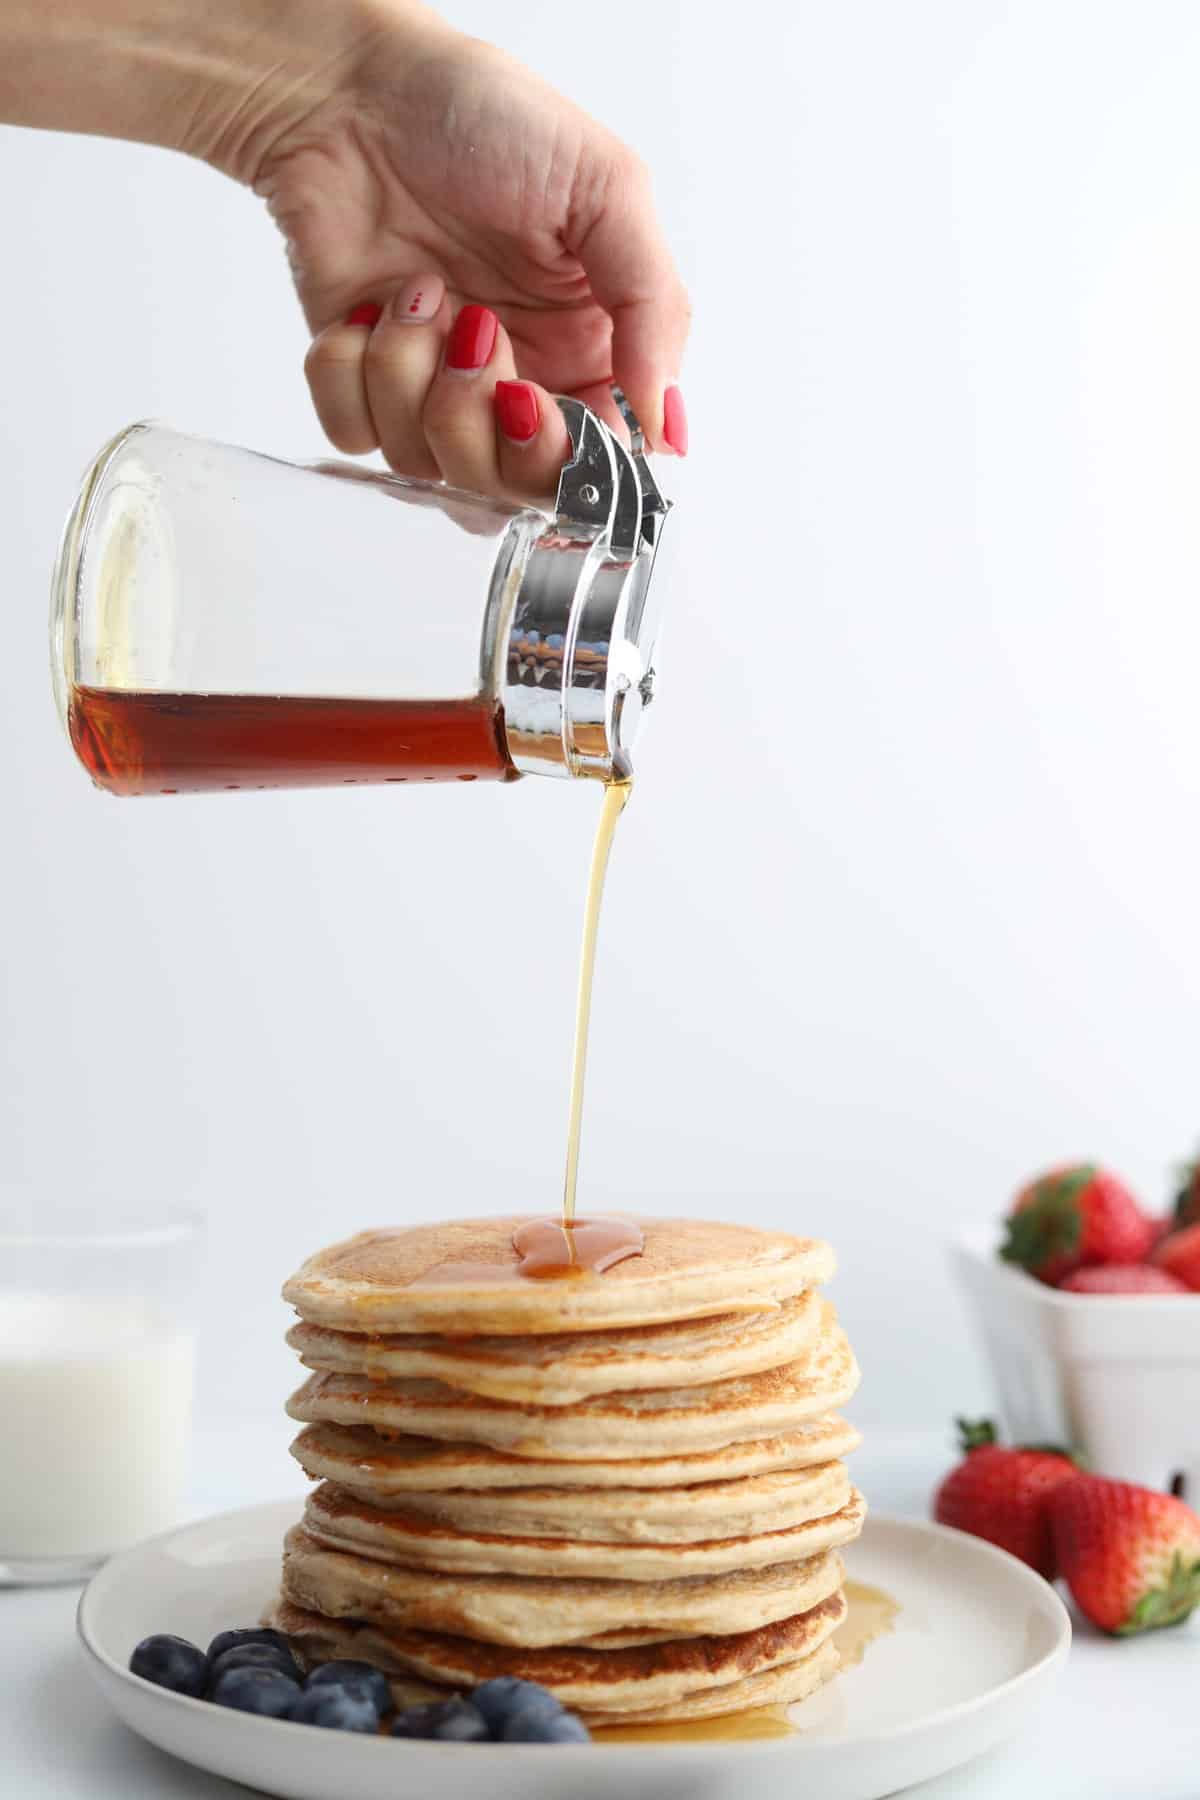 A stack of cottage cheese protein pancakes recipe on a white plate with blueberries on the side, strawberries in the background, and a woman's hand pouring syrup on top.